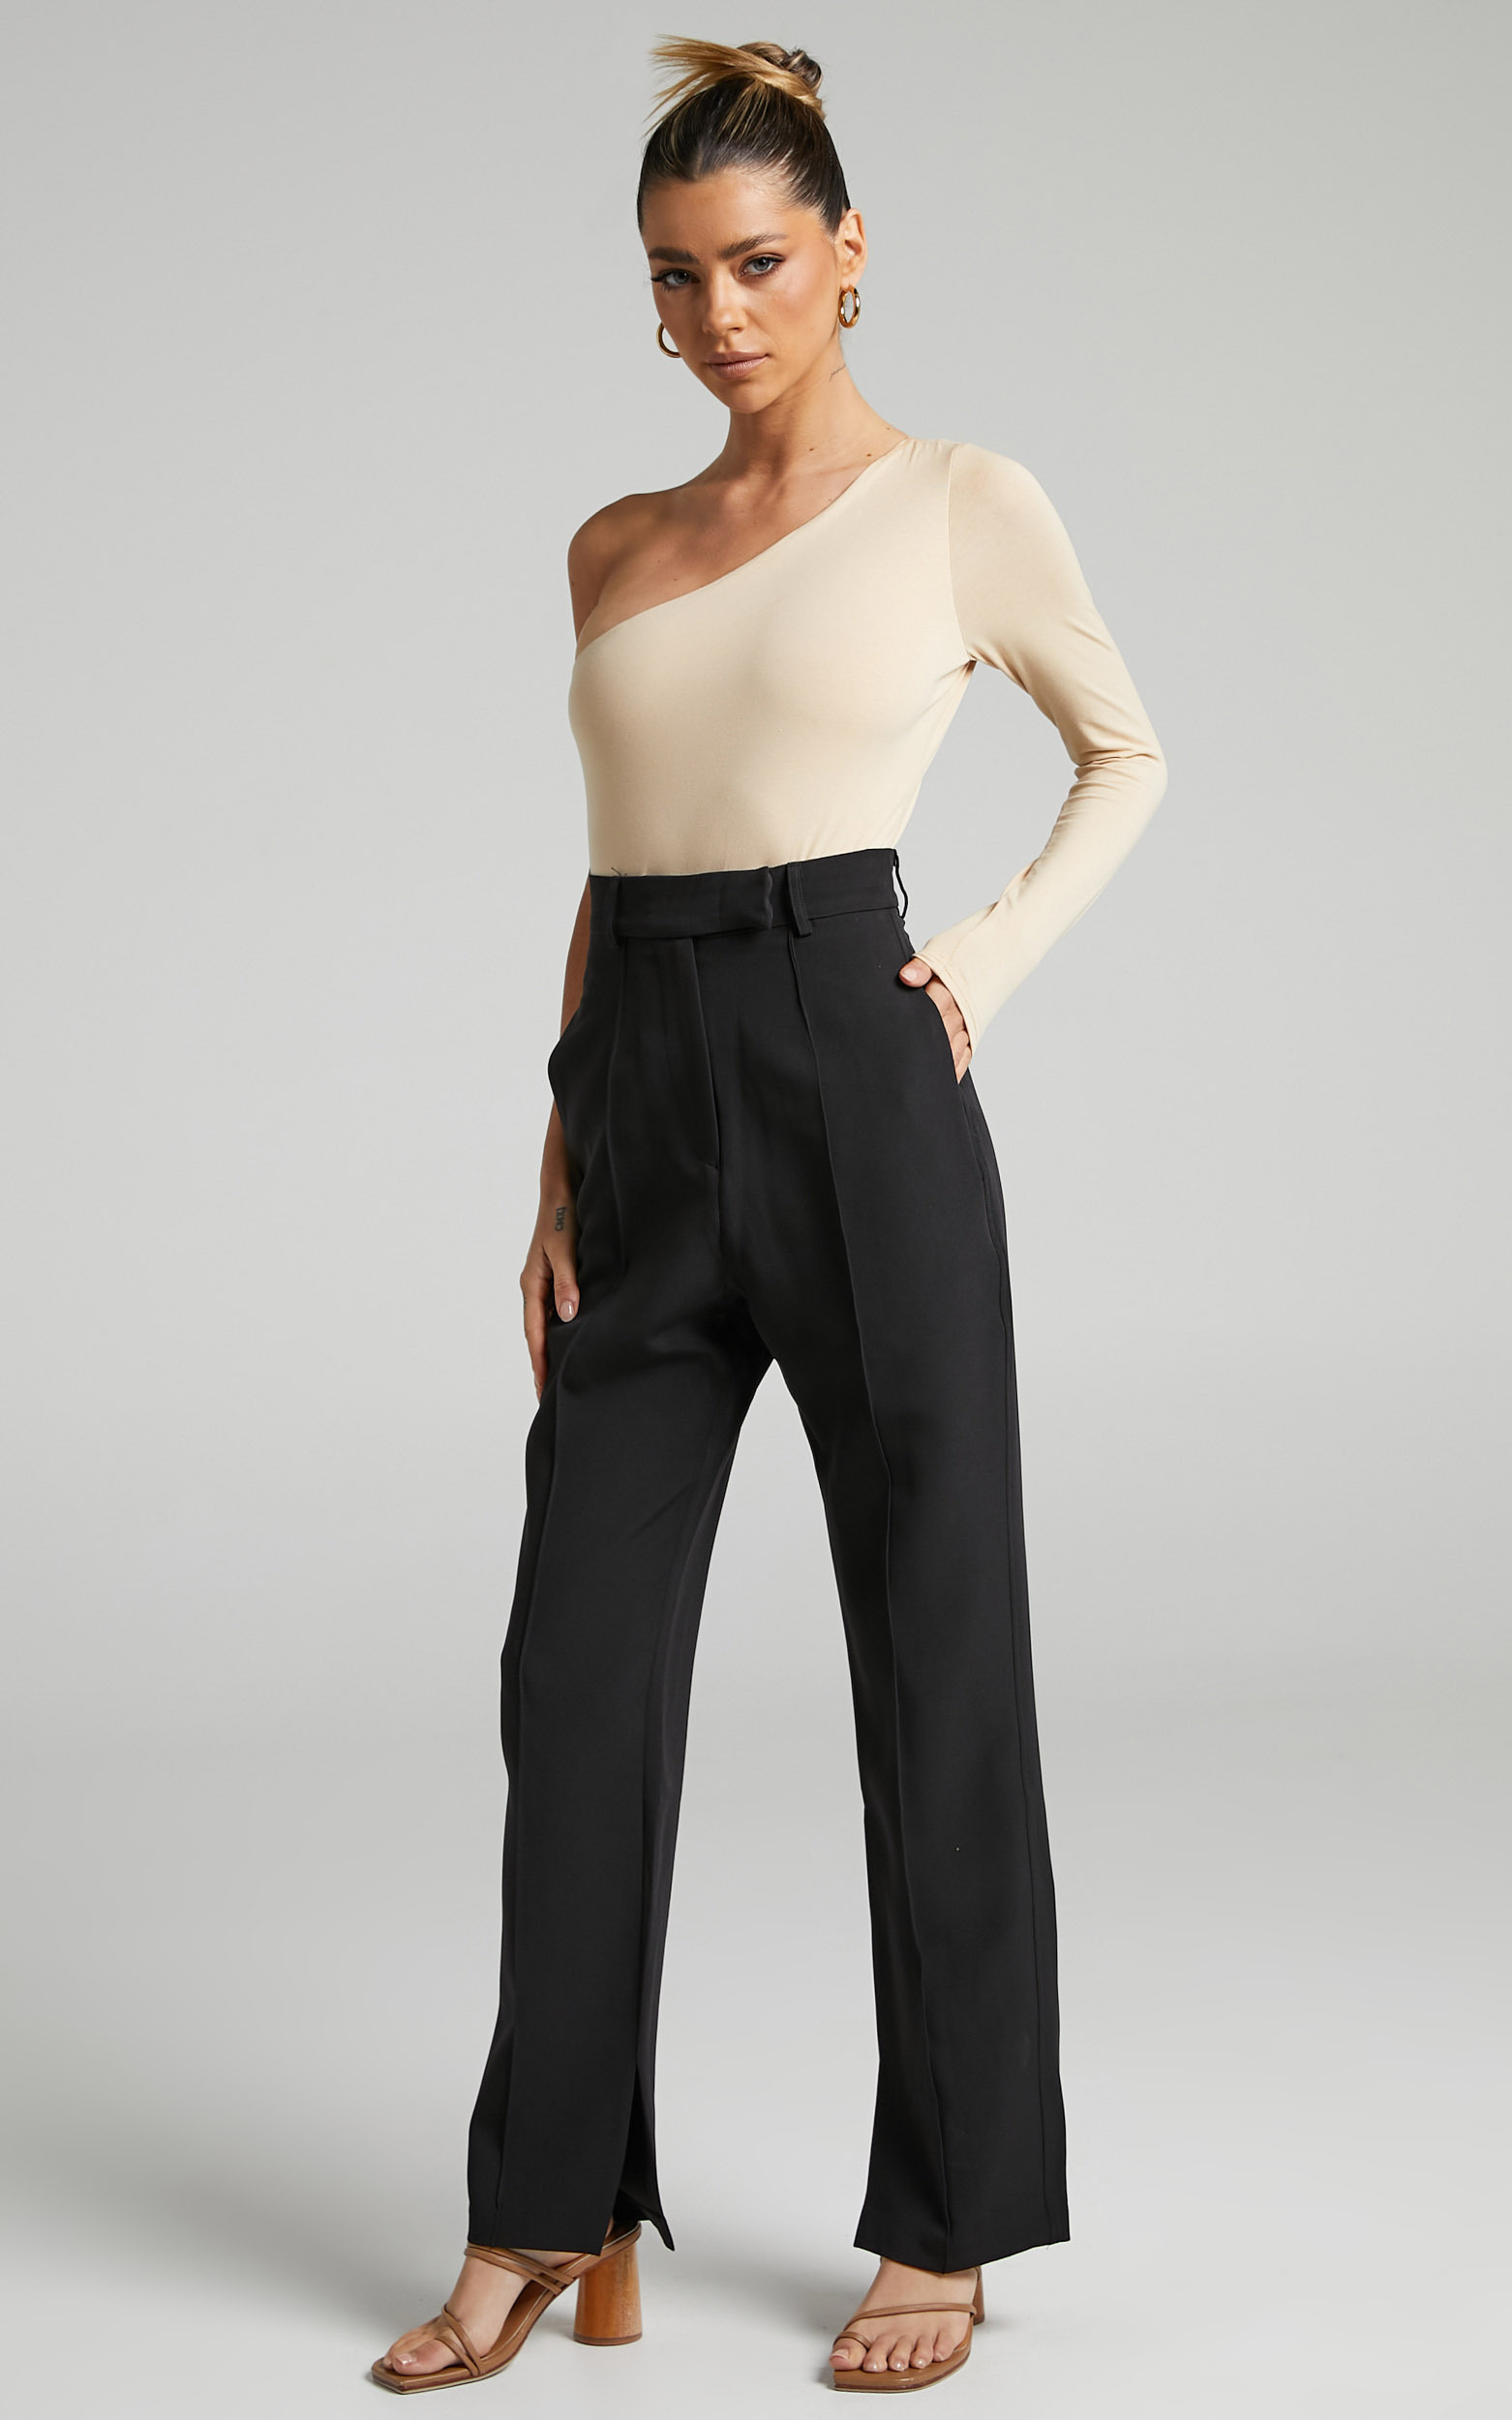 Rogers - High Waisted Pants in Black - 04, BLK1, hi-res image number null